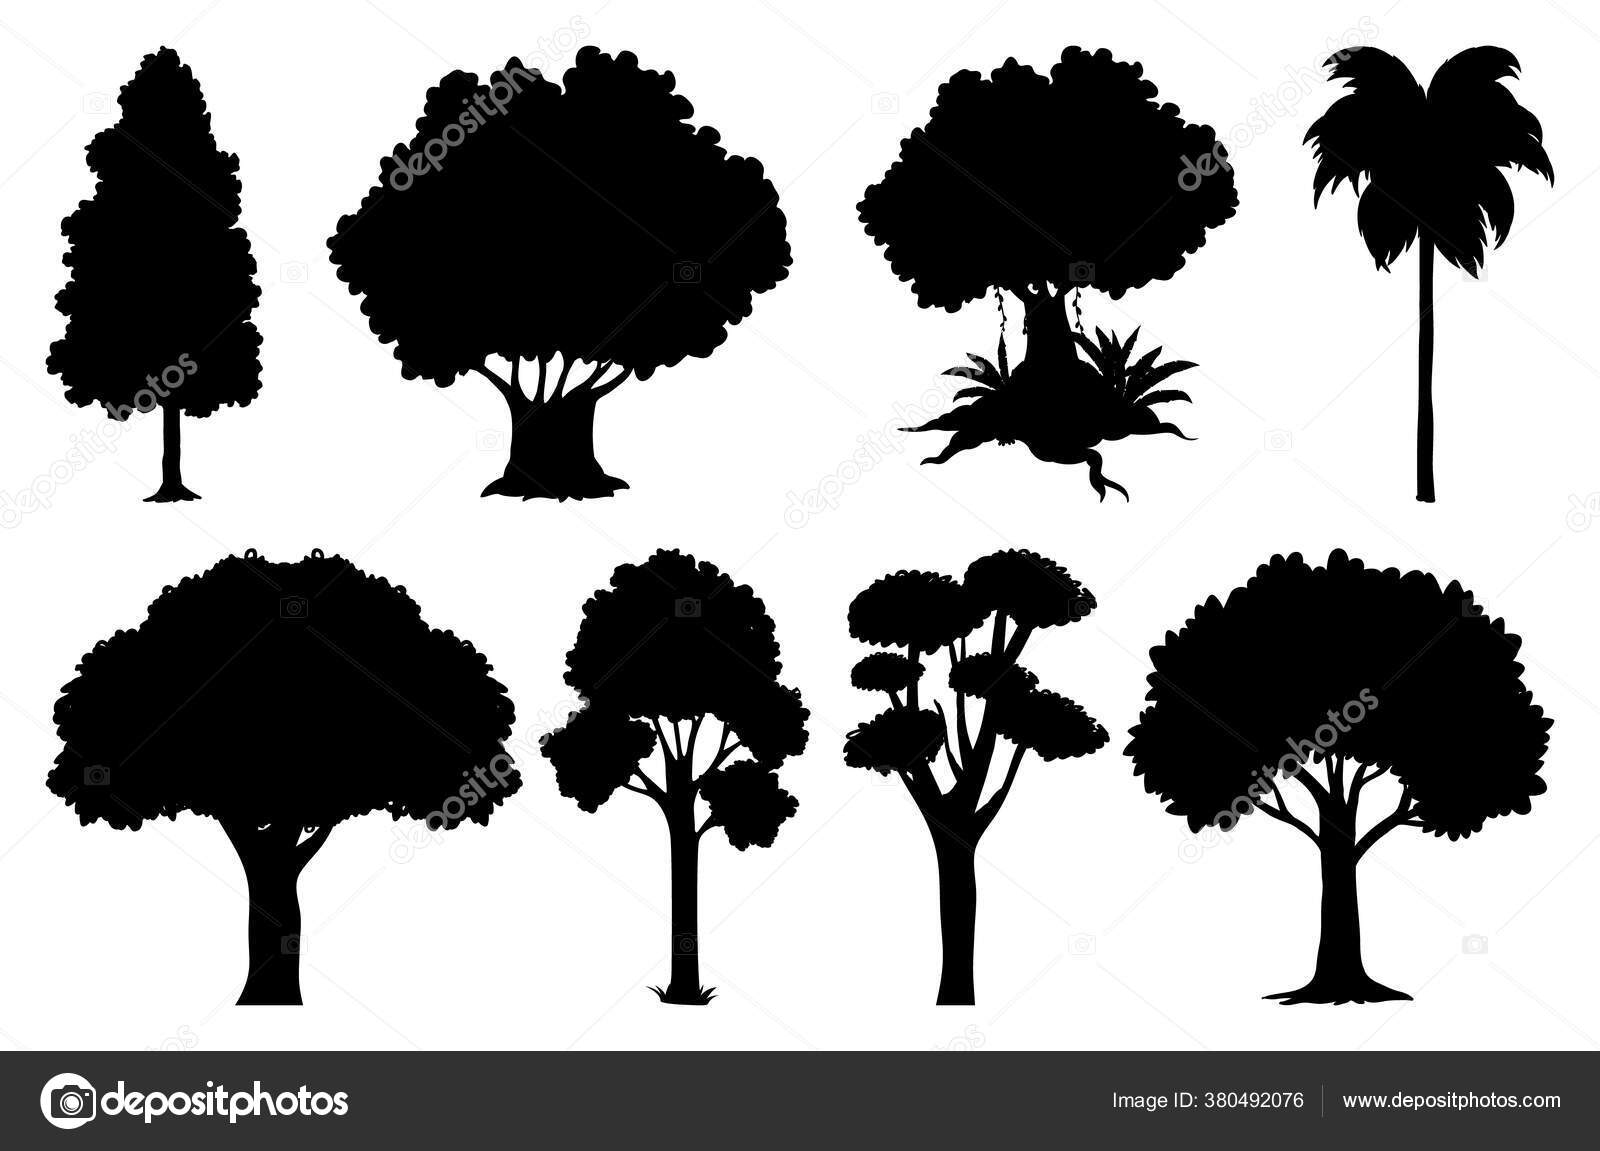 209,195 Tree silhouette Vector Images | Depositphotos